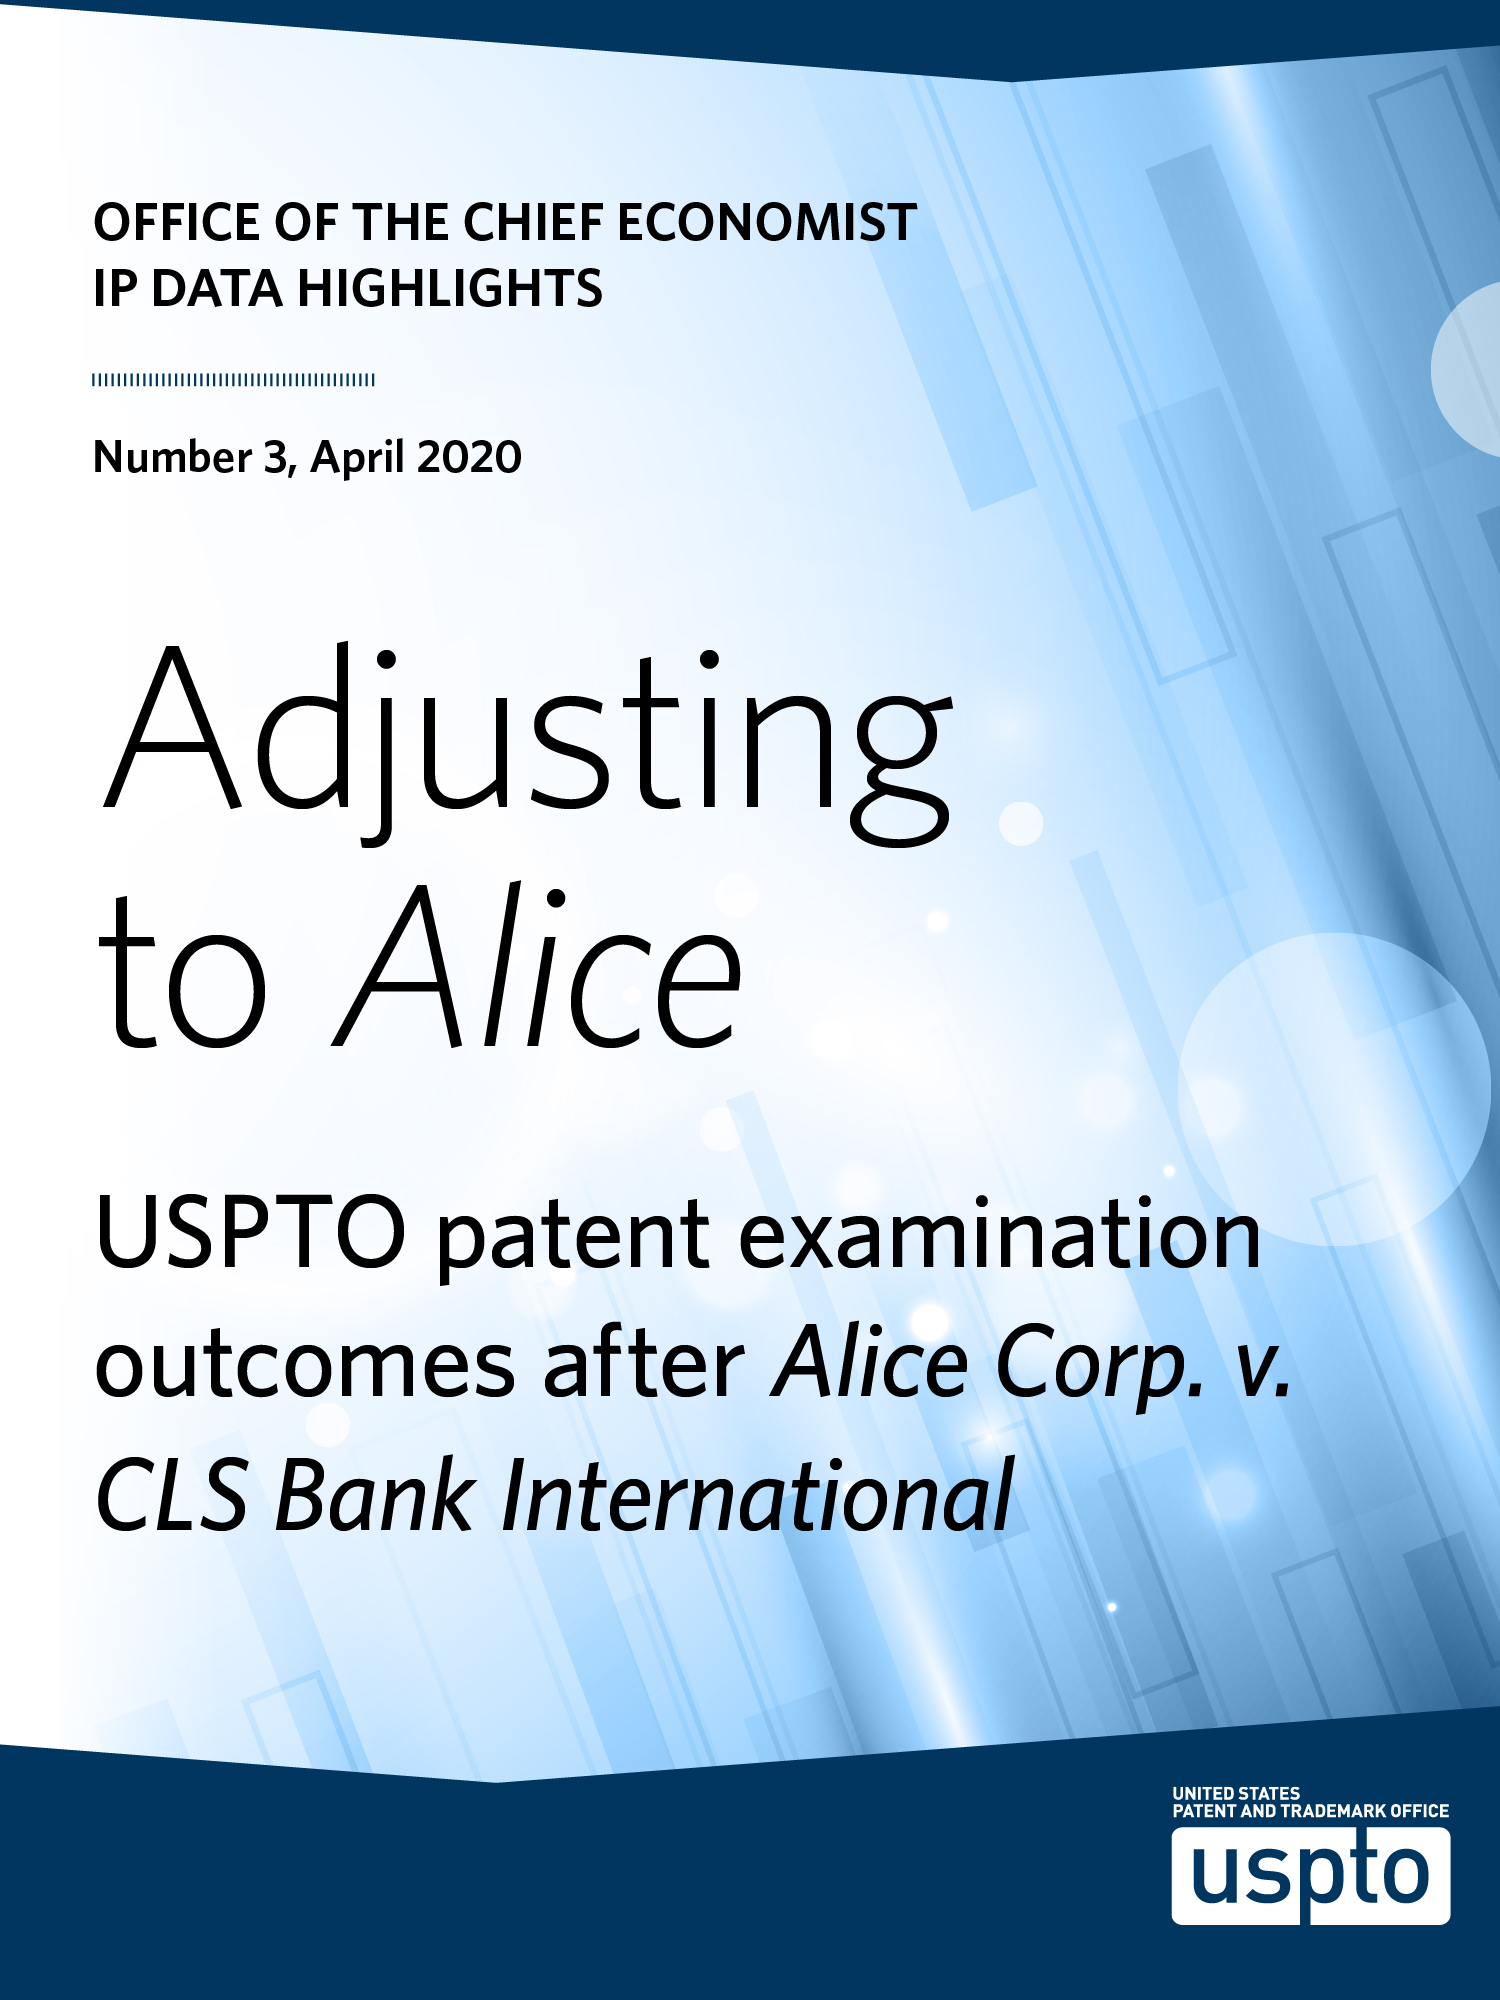 IP Data Highlight no. 3: Adjusting to Alice report, text on a blue background